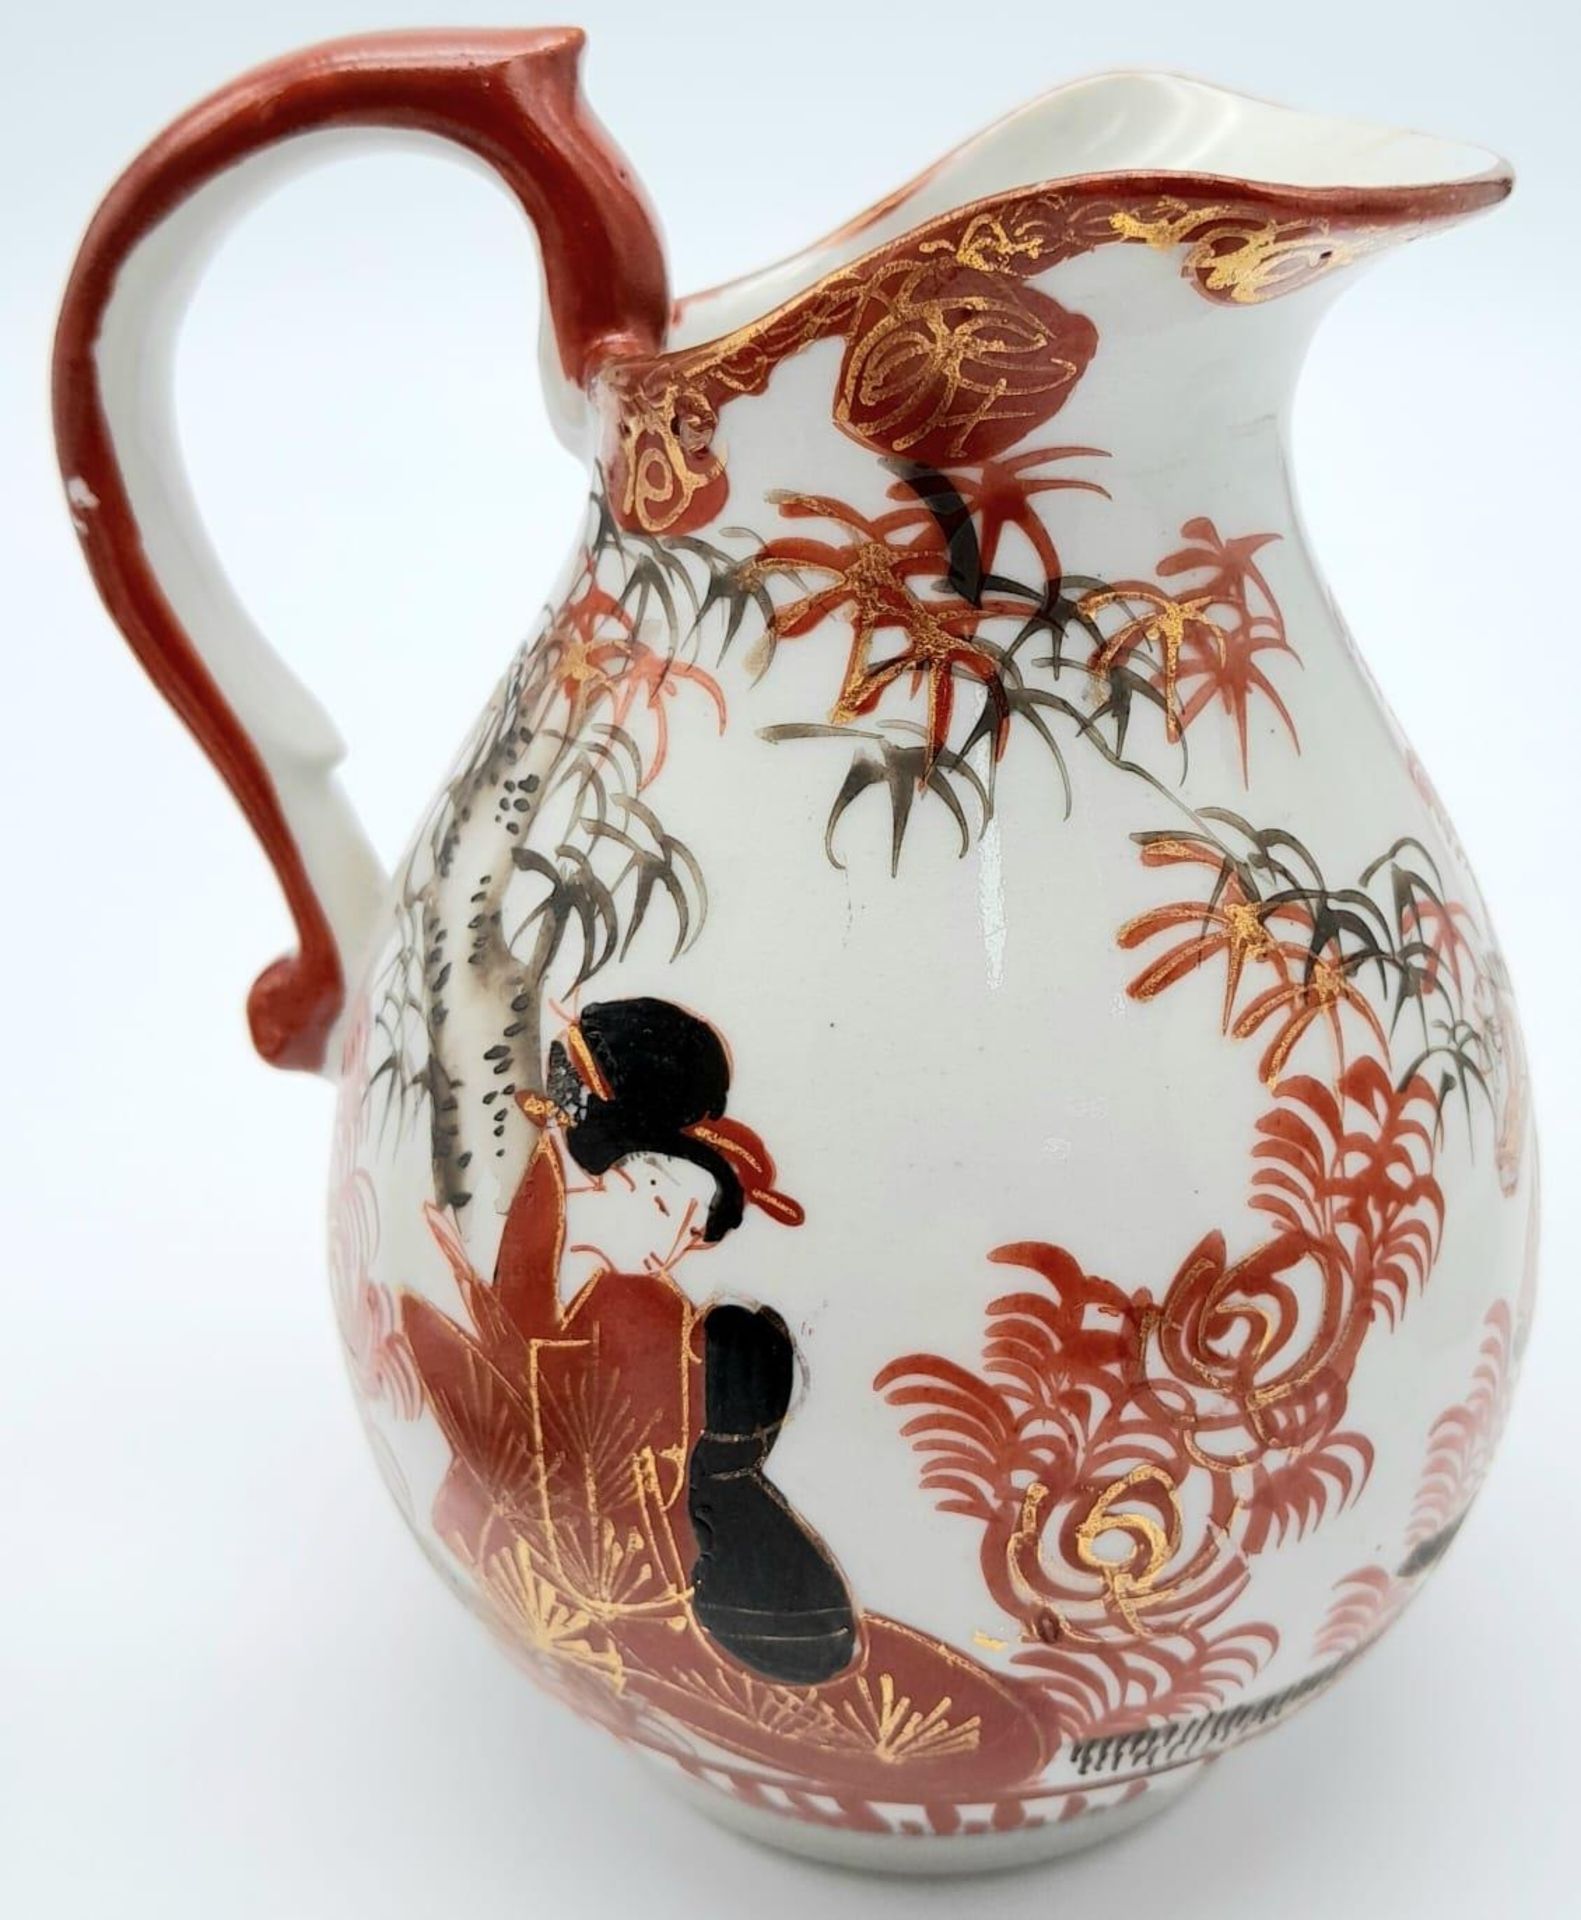 A SMALL JAPANESE WATER JUG AND SAUCER FROM LATE 19TH CENTURY . 13cms TALL - Image 6 of 9